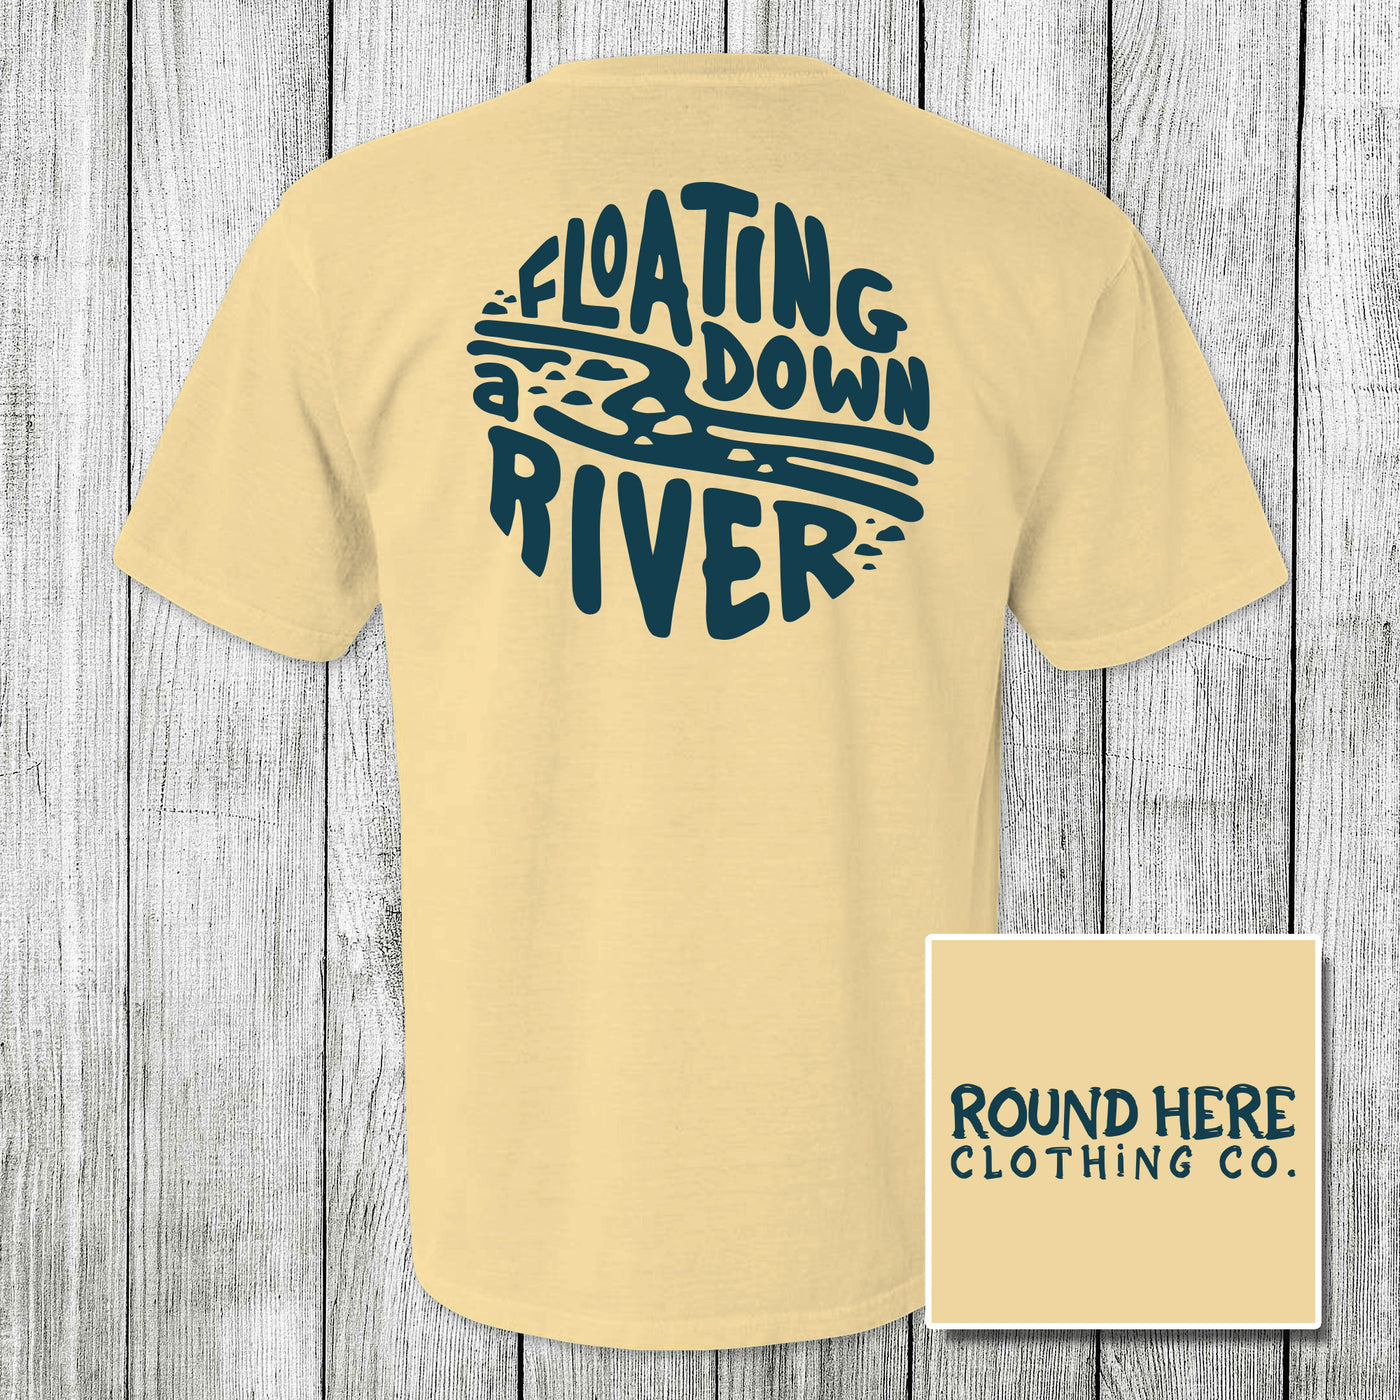 'Round Here Clothing Floating Down a River